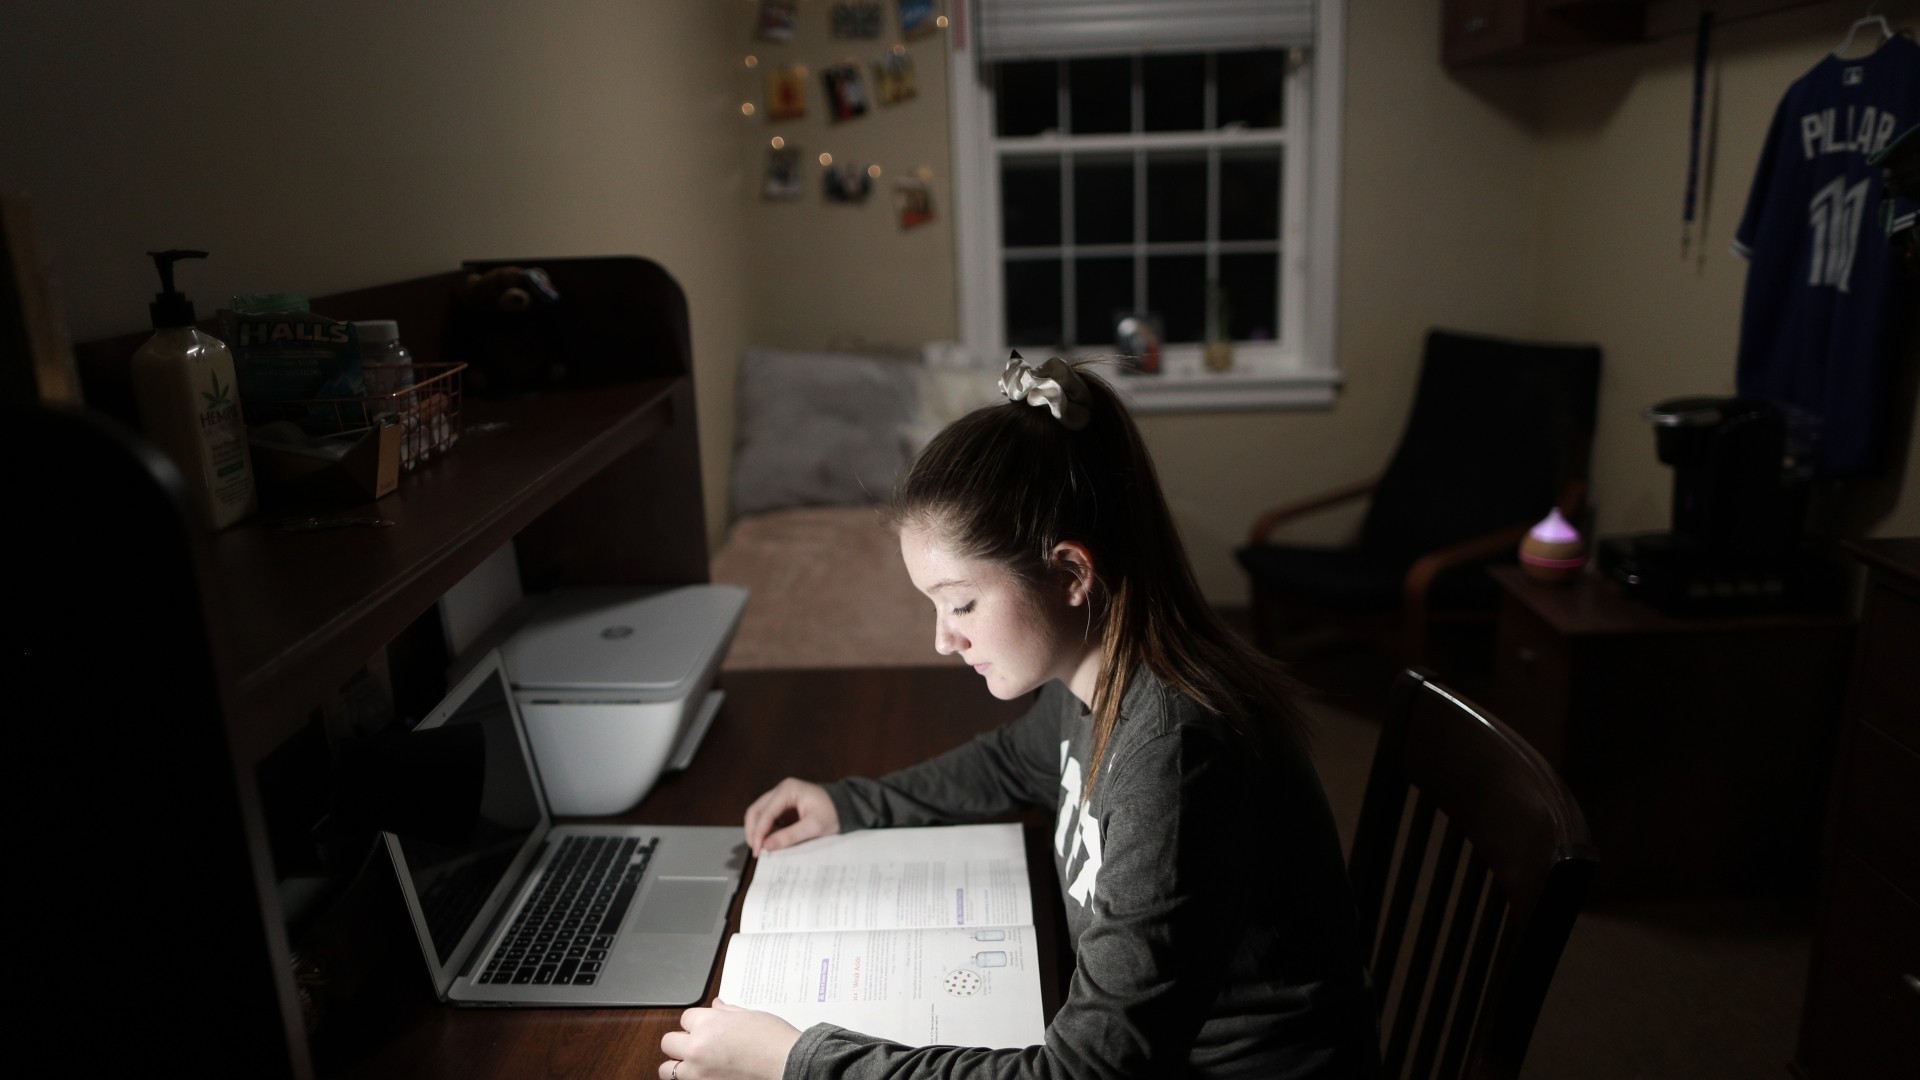 Student in their residence room studying while sitting at their desk on a dark evening.